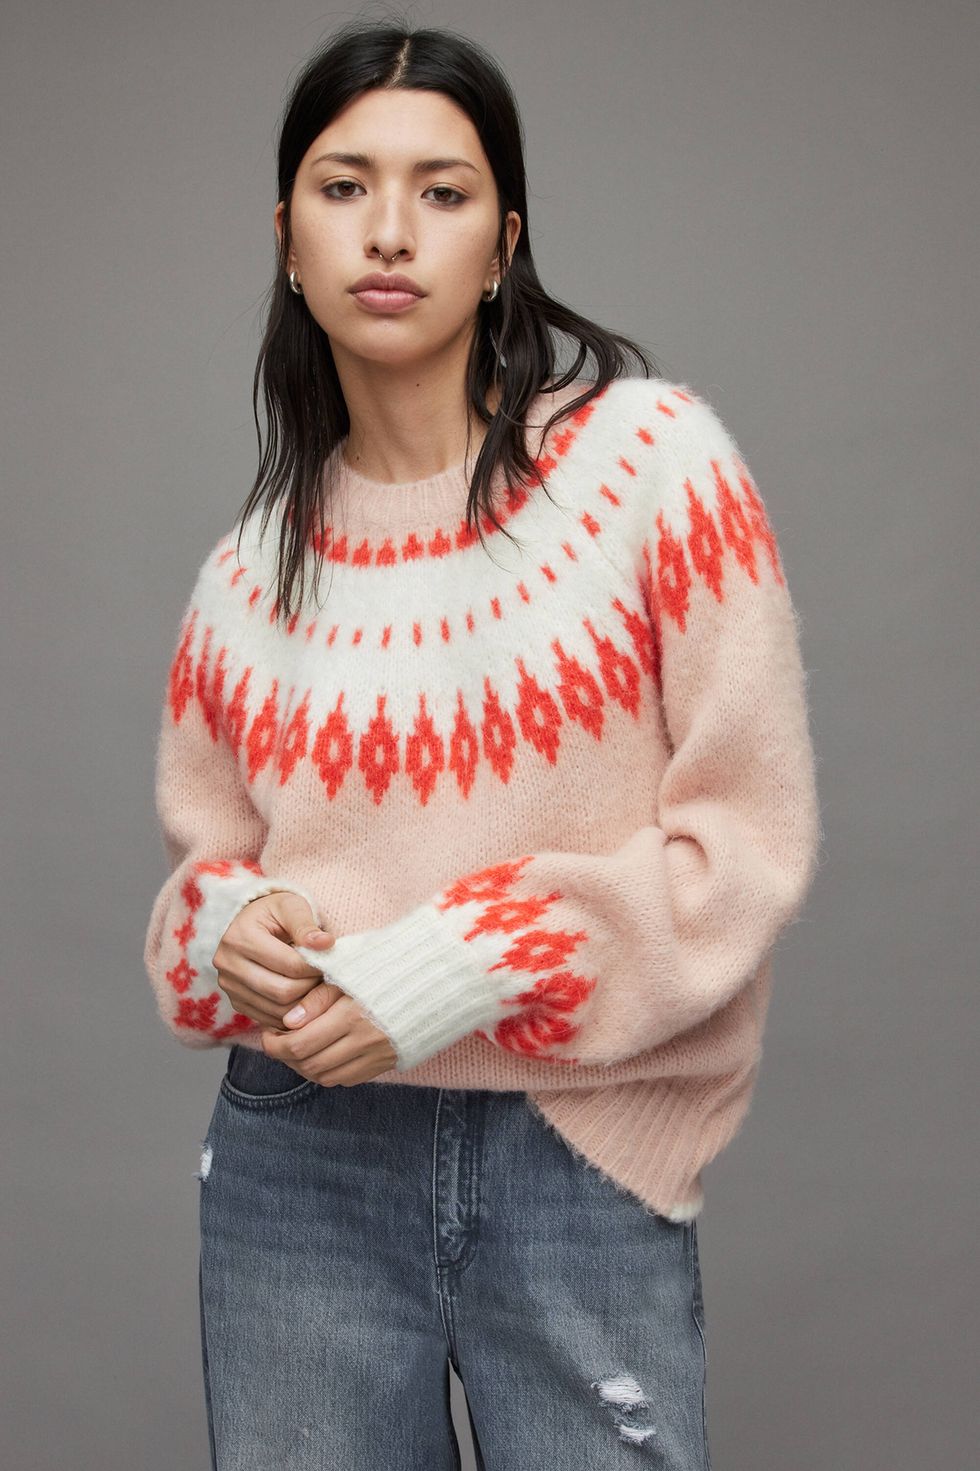 Amp Up Your Winter Style with Pantone’s Colour of the Year, Peach Fuzz-Image 1